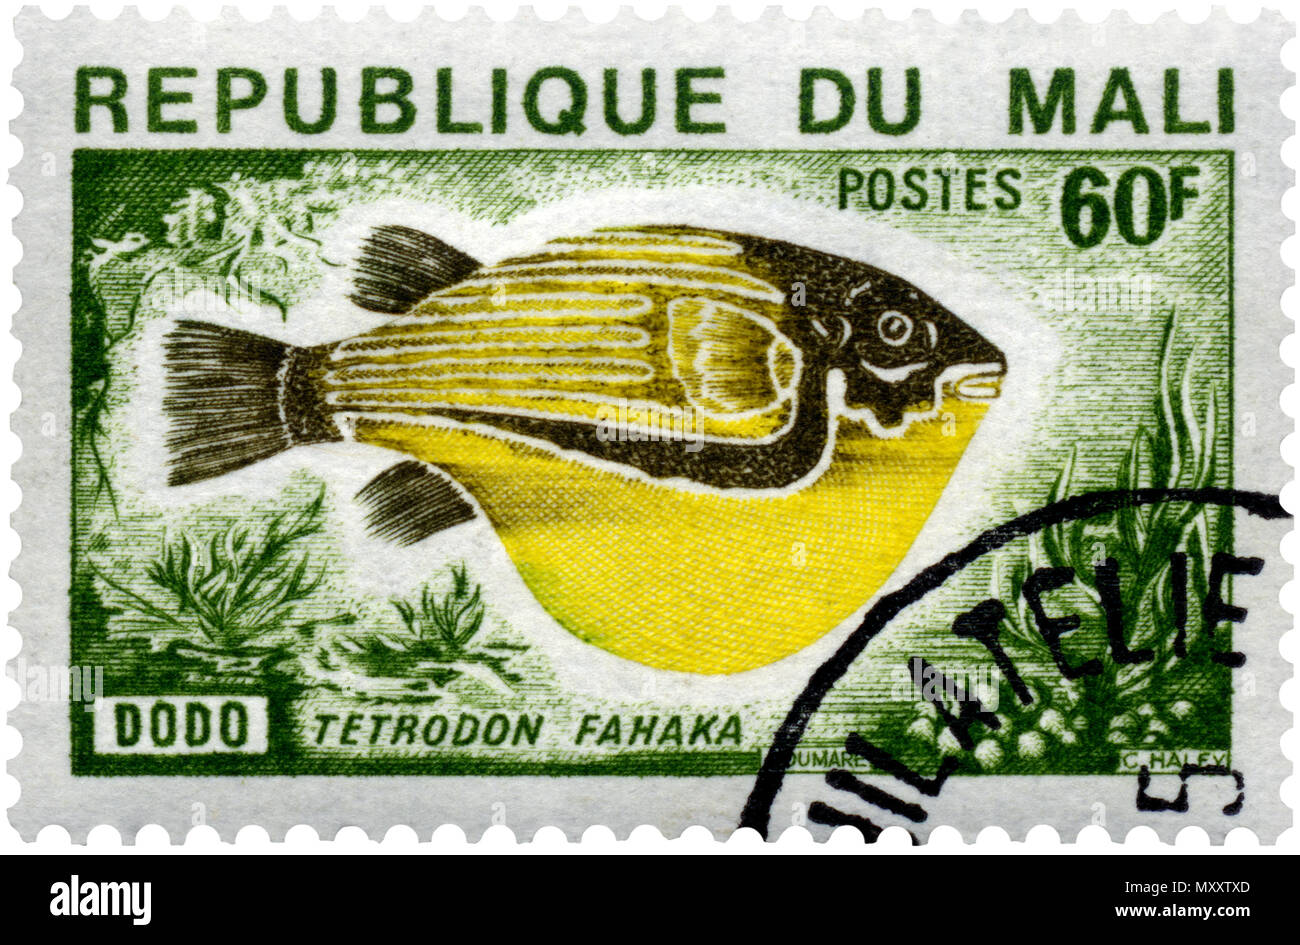 Fish on Mali Postage Stamps Stock Photo